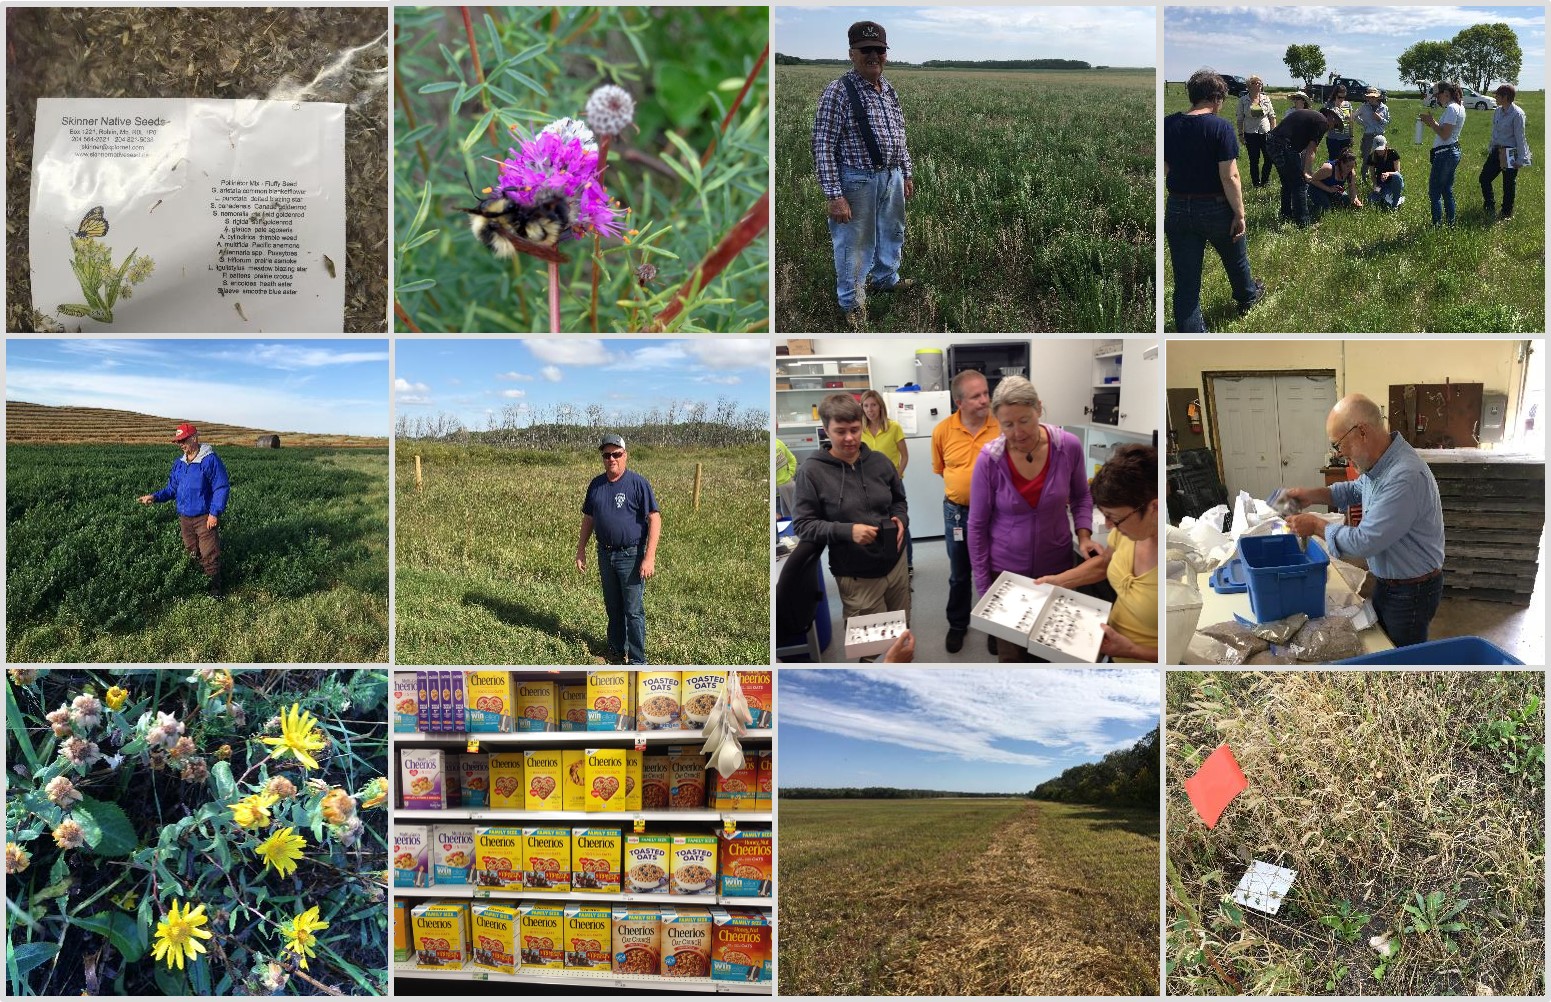 A collaged collection of photos depicts farmland, people talking in a lab, bees on flowers, and more.